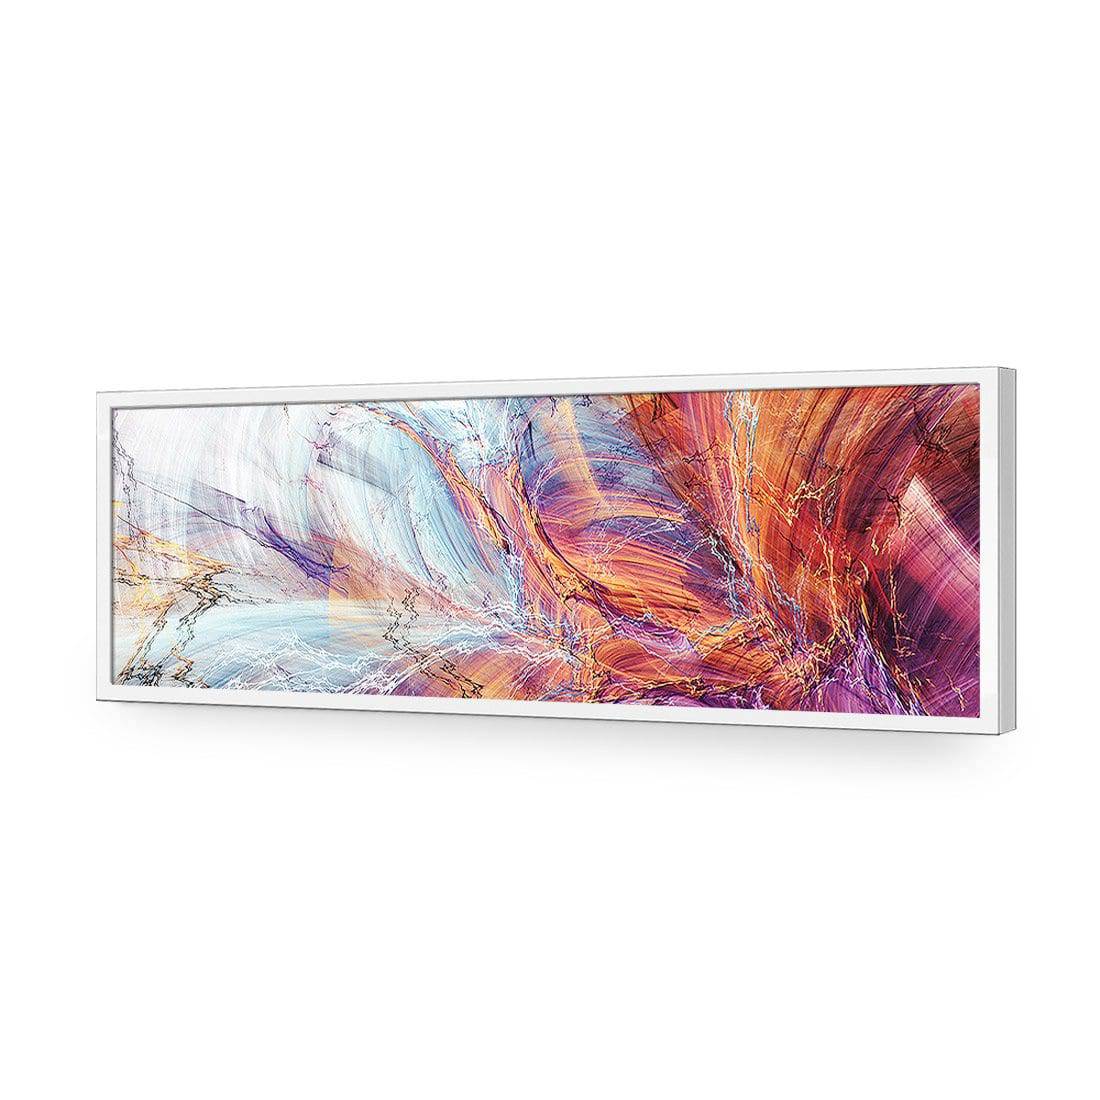 Glorious, Long-Acrylic-Wall Art Design-Without Border-Acrylic - White Frame-60x20cm-Wall Art Designs